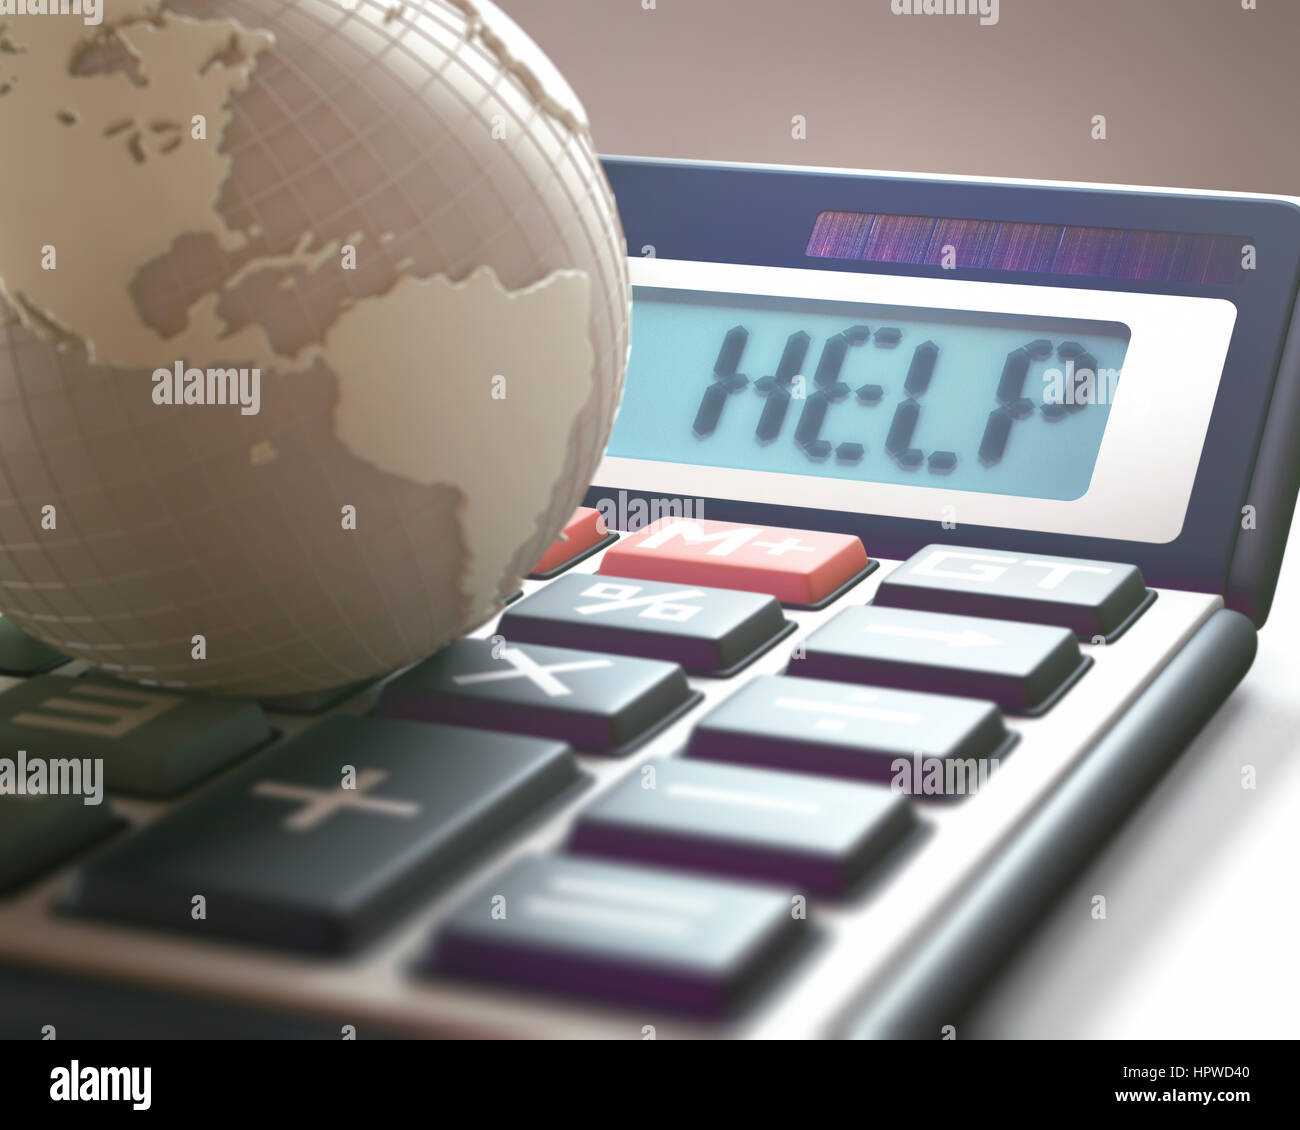 Calculator with the word help and globe, illustration. Stock Photo